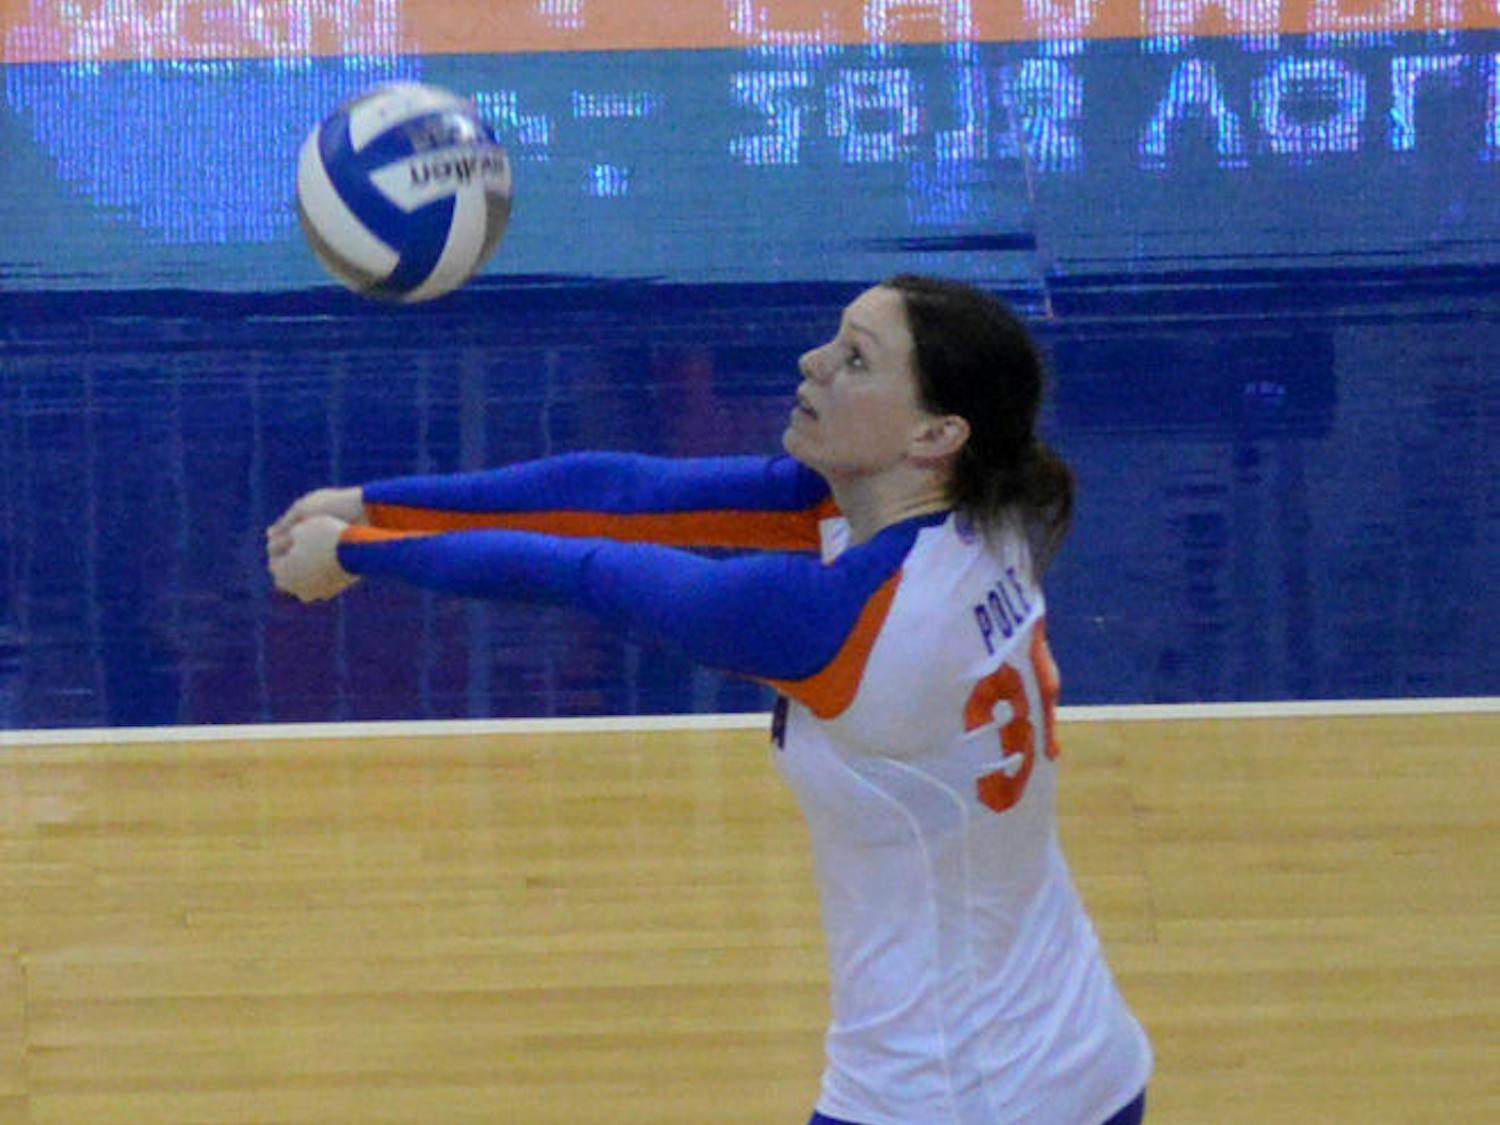 Holly Pole records a dig during Florida's 3-2 loss to Florida State on Dec. 6 in the second round of the NCAA Tournament in the O'Connell Center. Pole has 527 career digs and 52 career service aces heading into the 2014 season — her senior year.